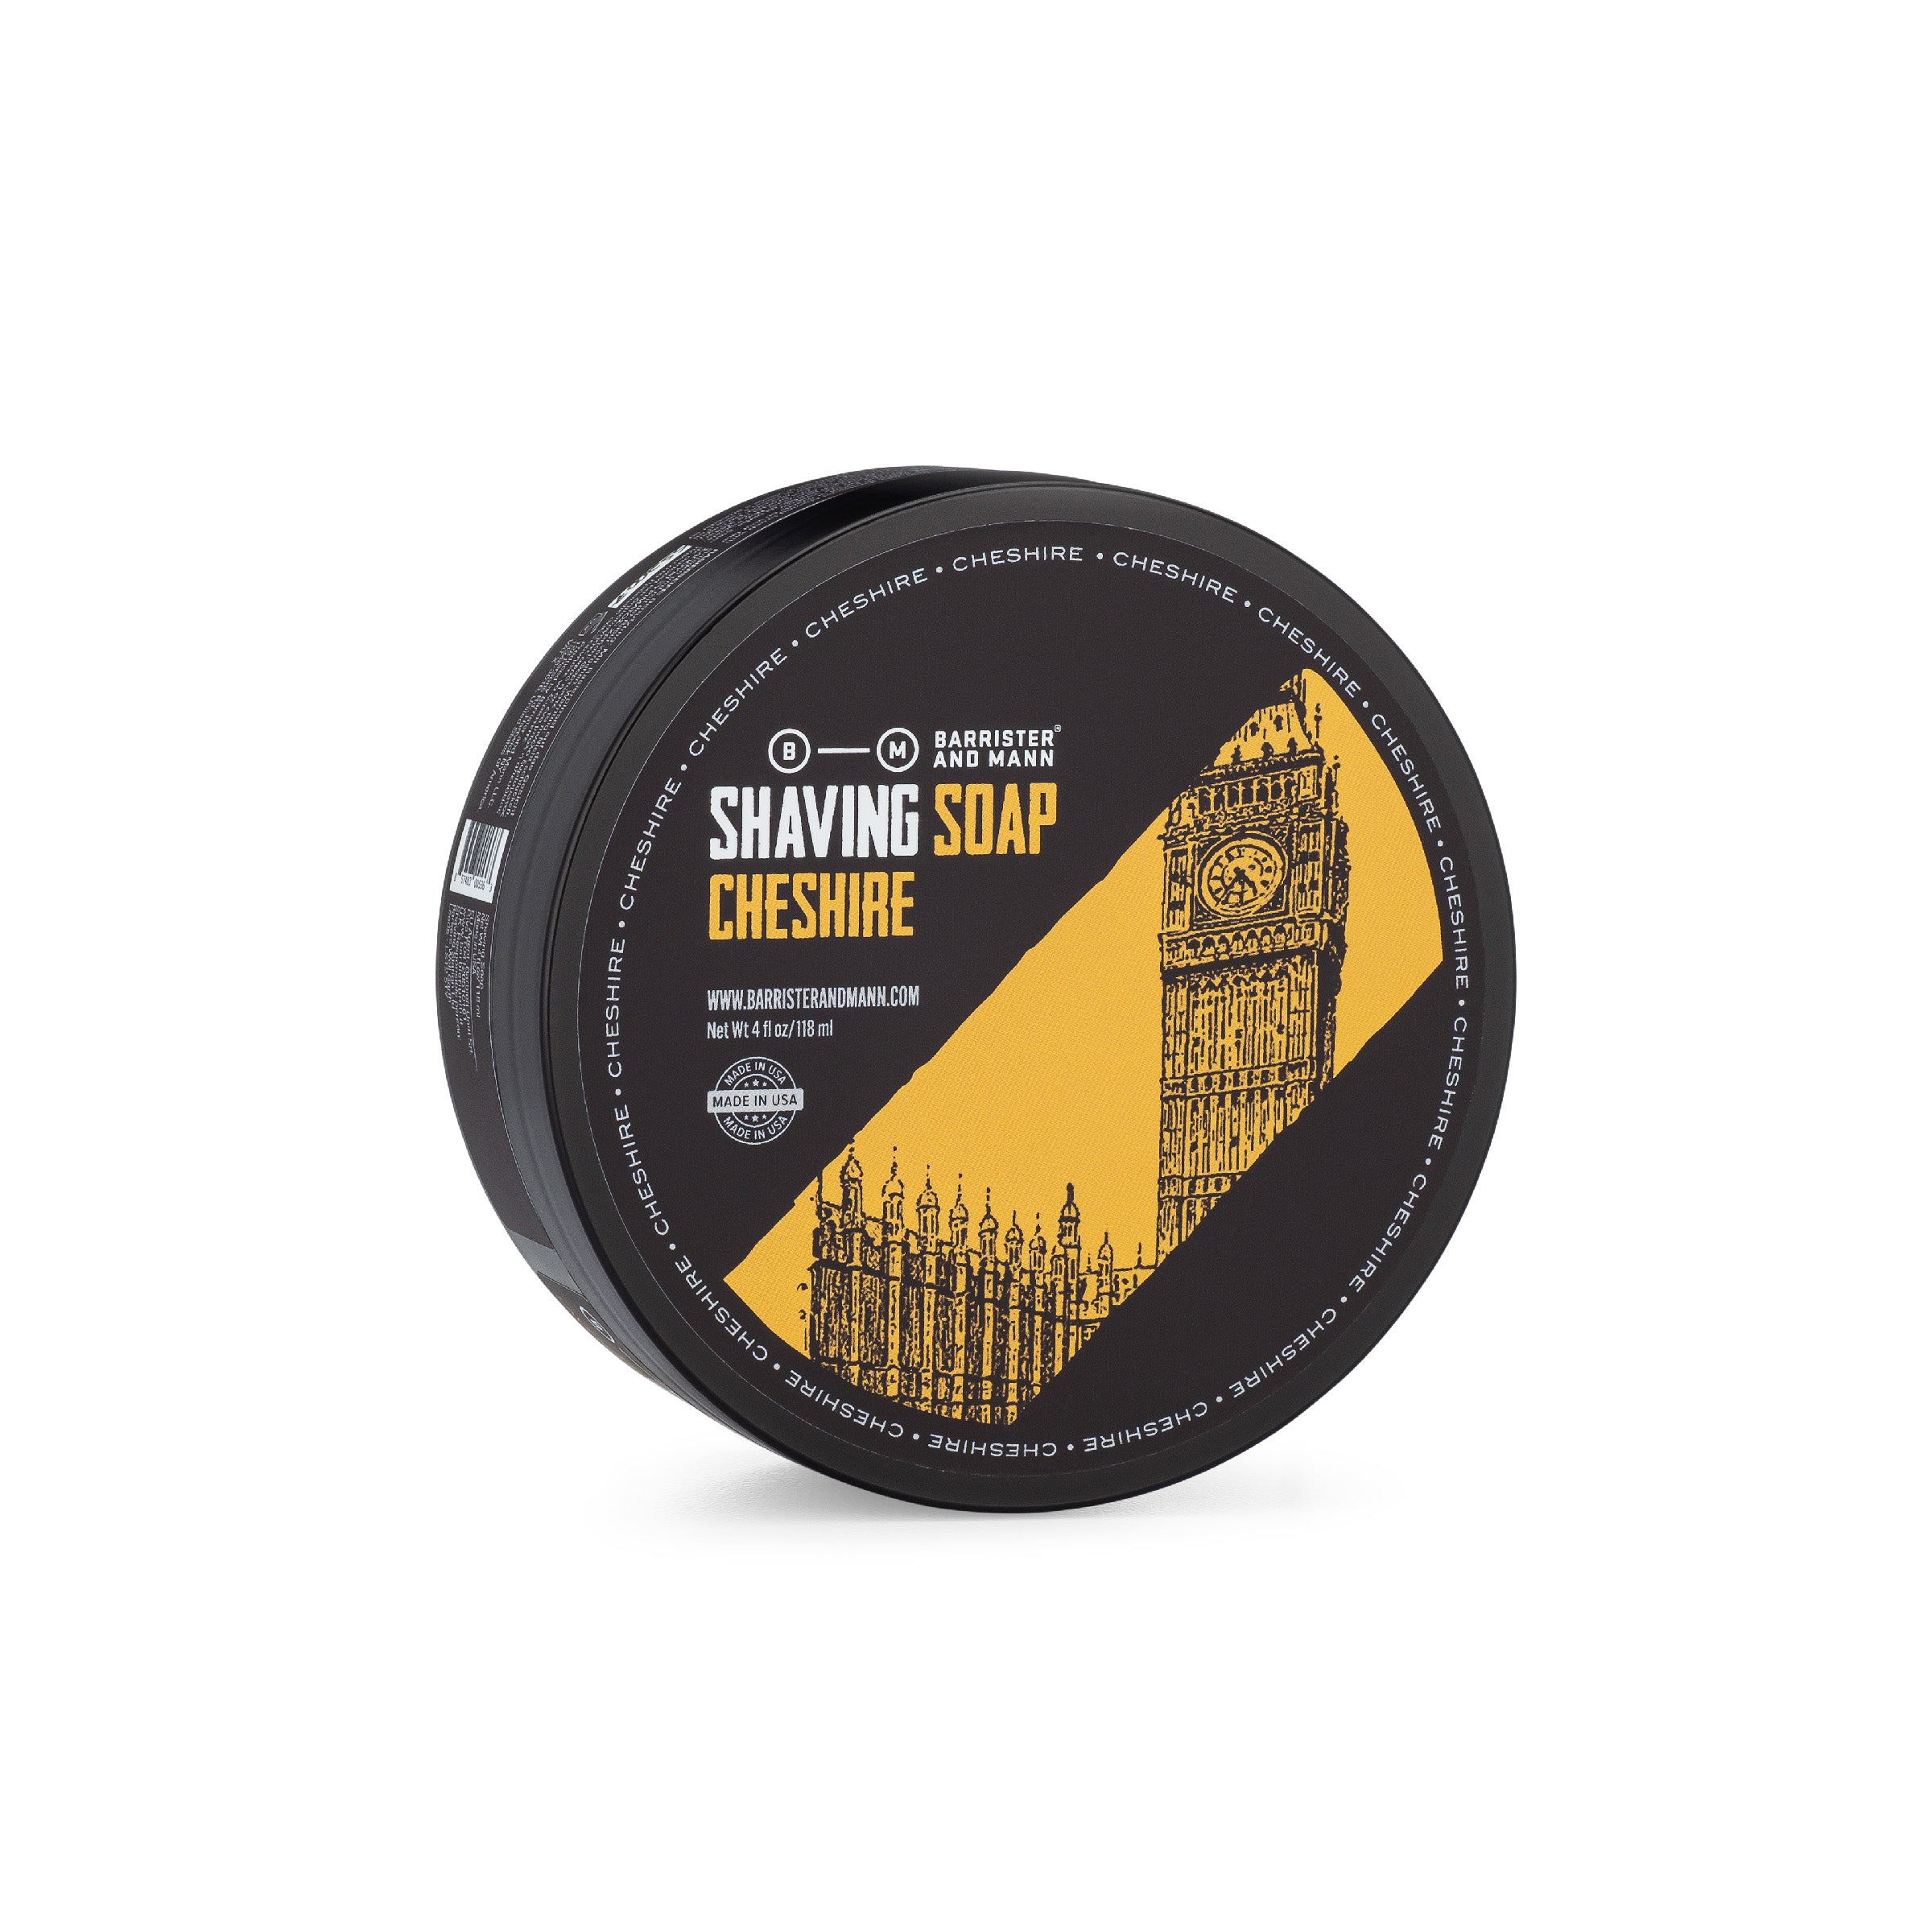 Cheshire Shaving Soap - Barrister and Mann LLC